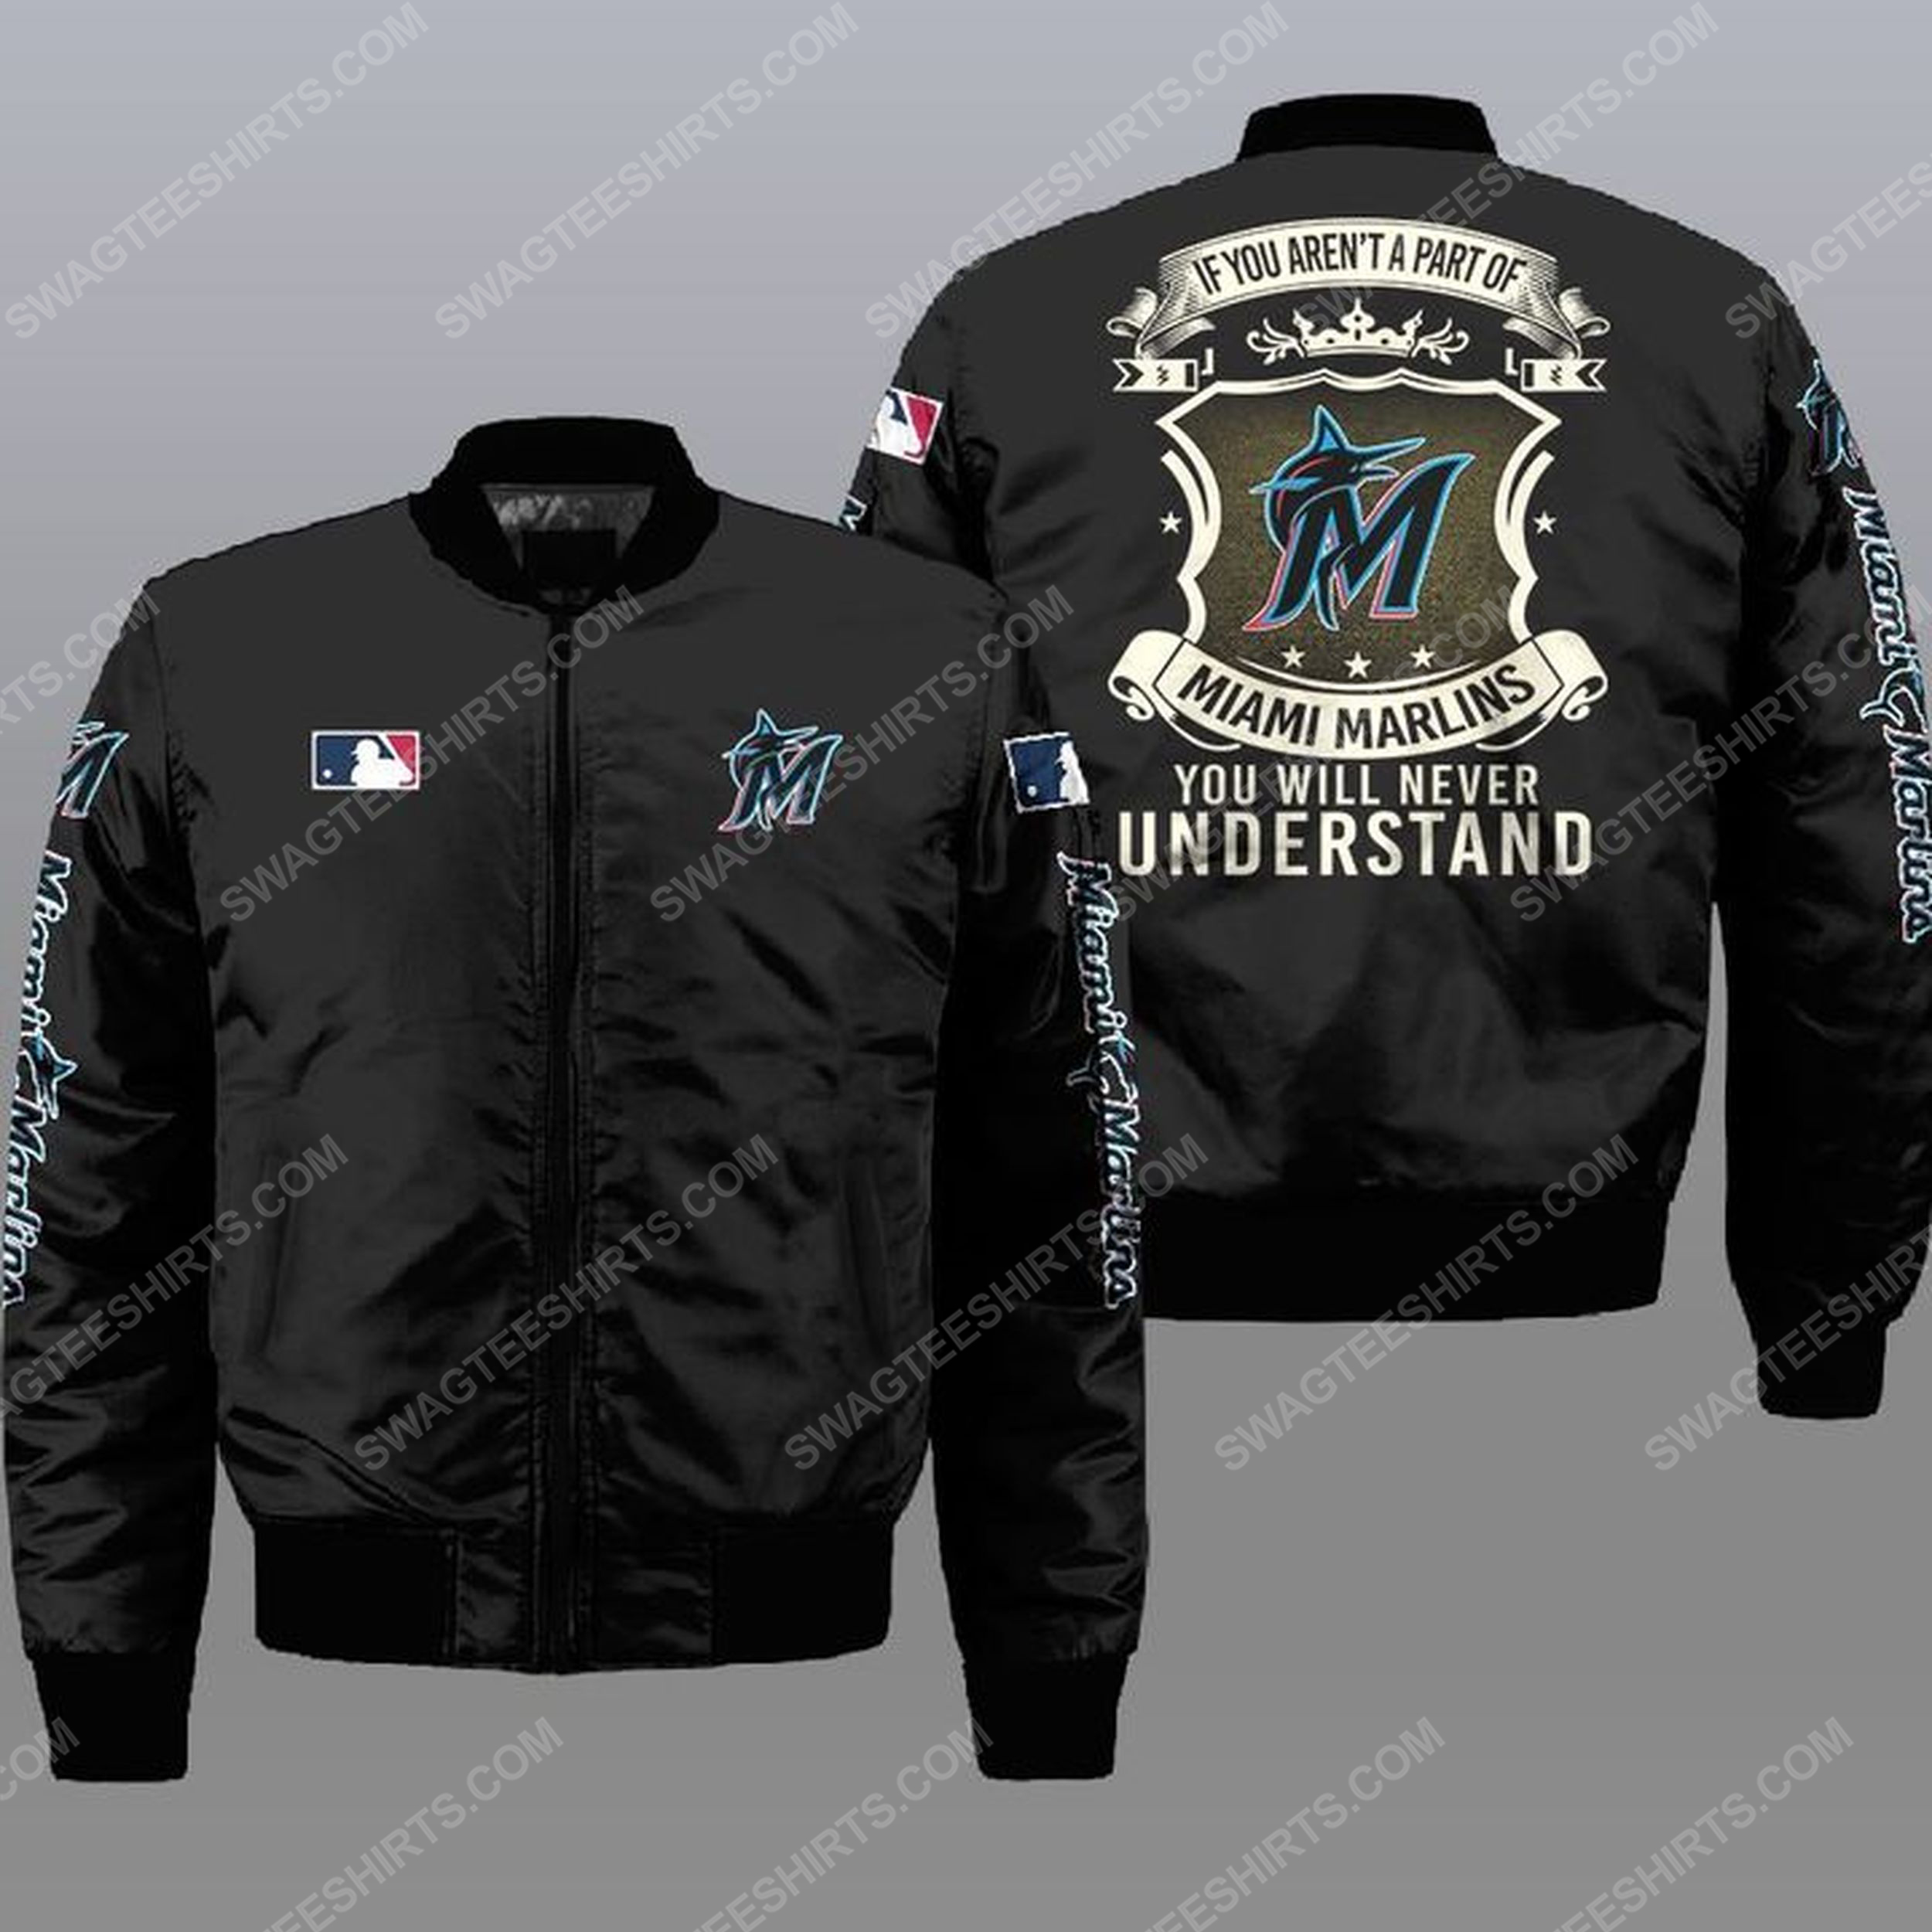 You will never understand miami marlins all over print bomber jacket - black 1